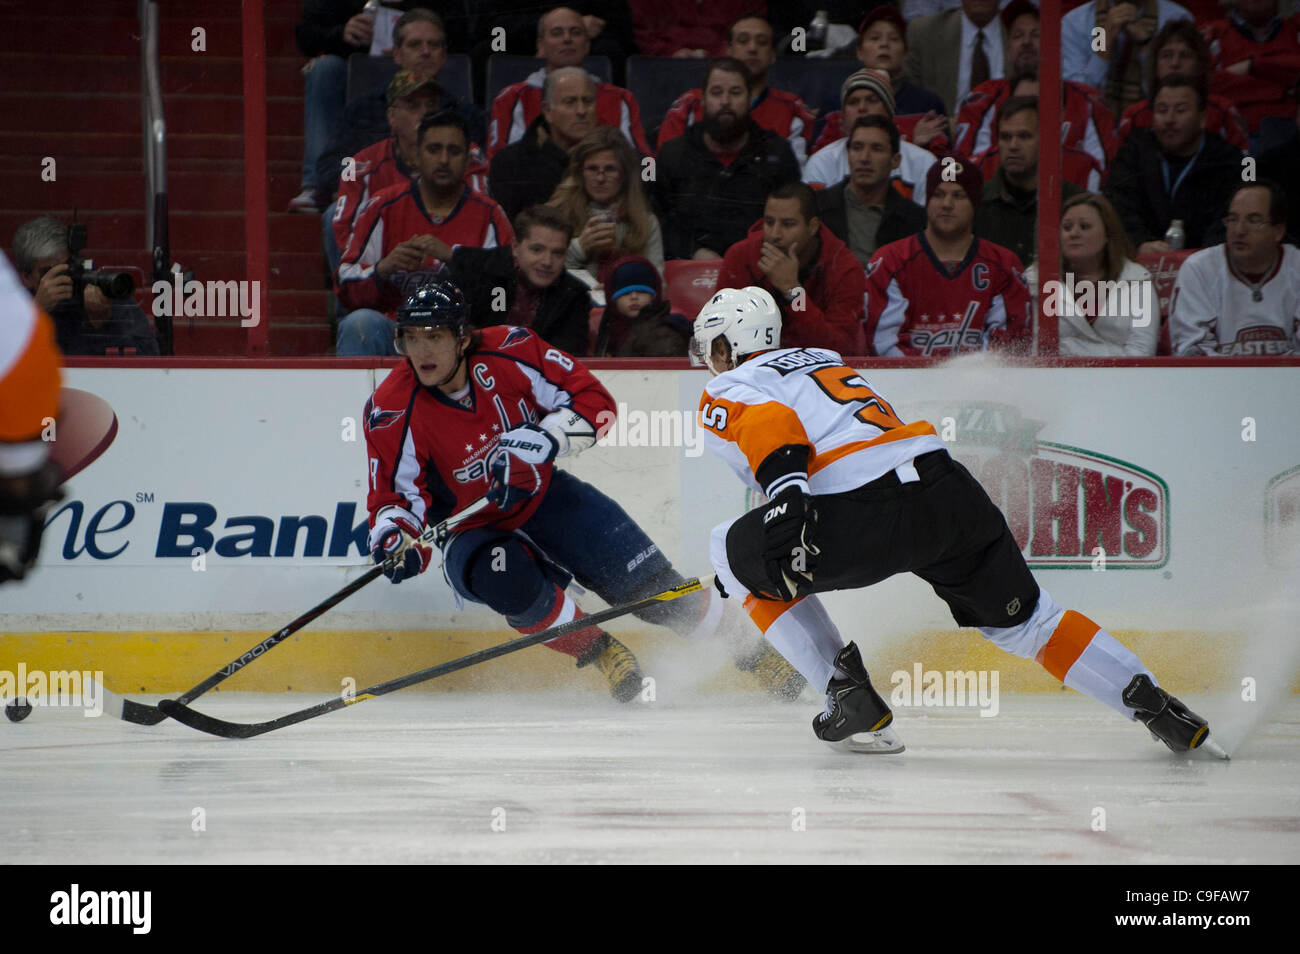 Dec. 13, 2011 - Washington Dc, District of Columbia, United States of America - NHL; Washington Capitals left wing Alex Ovechkin (8) fakes Philadelphia Flyers defenseman Braydon Coburn (5)..Flyers continue their wining streak defeating the Capitals at home 5 - 1 (Credit Image: © Roland Pintilie/Sout Stock Photo